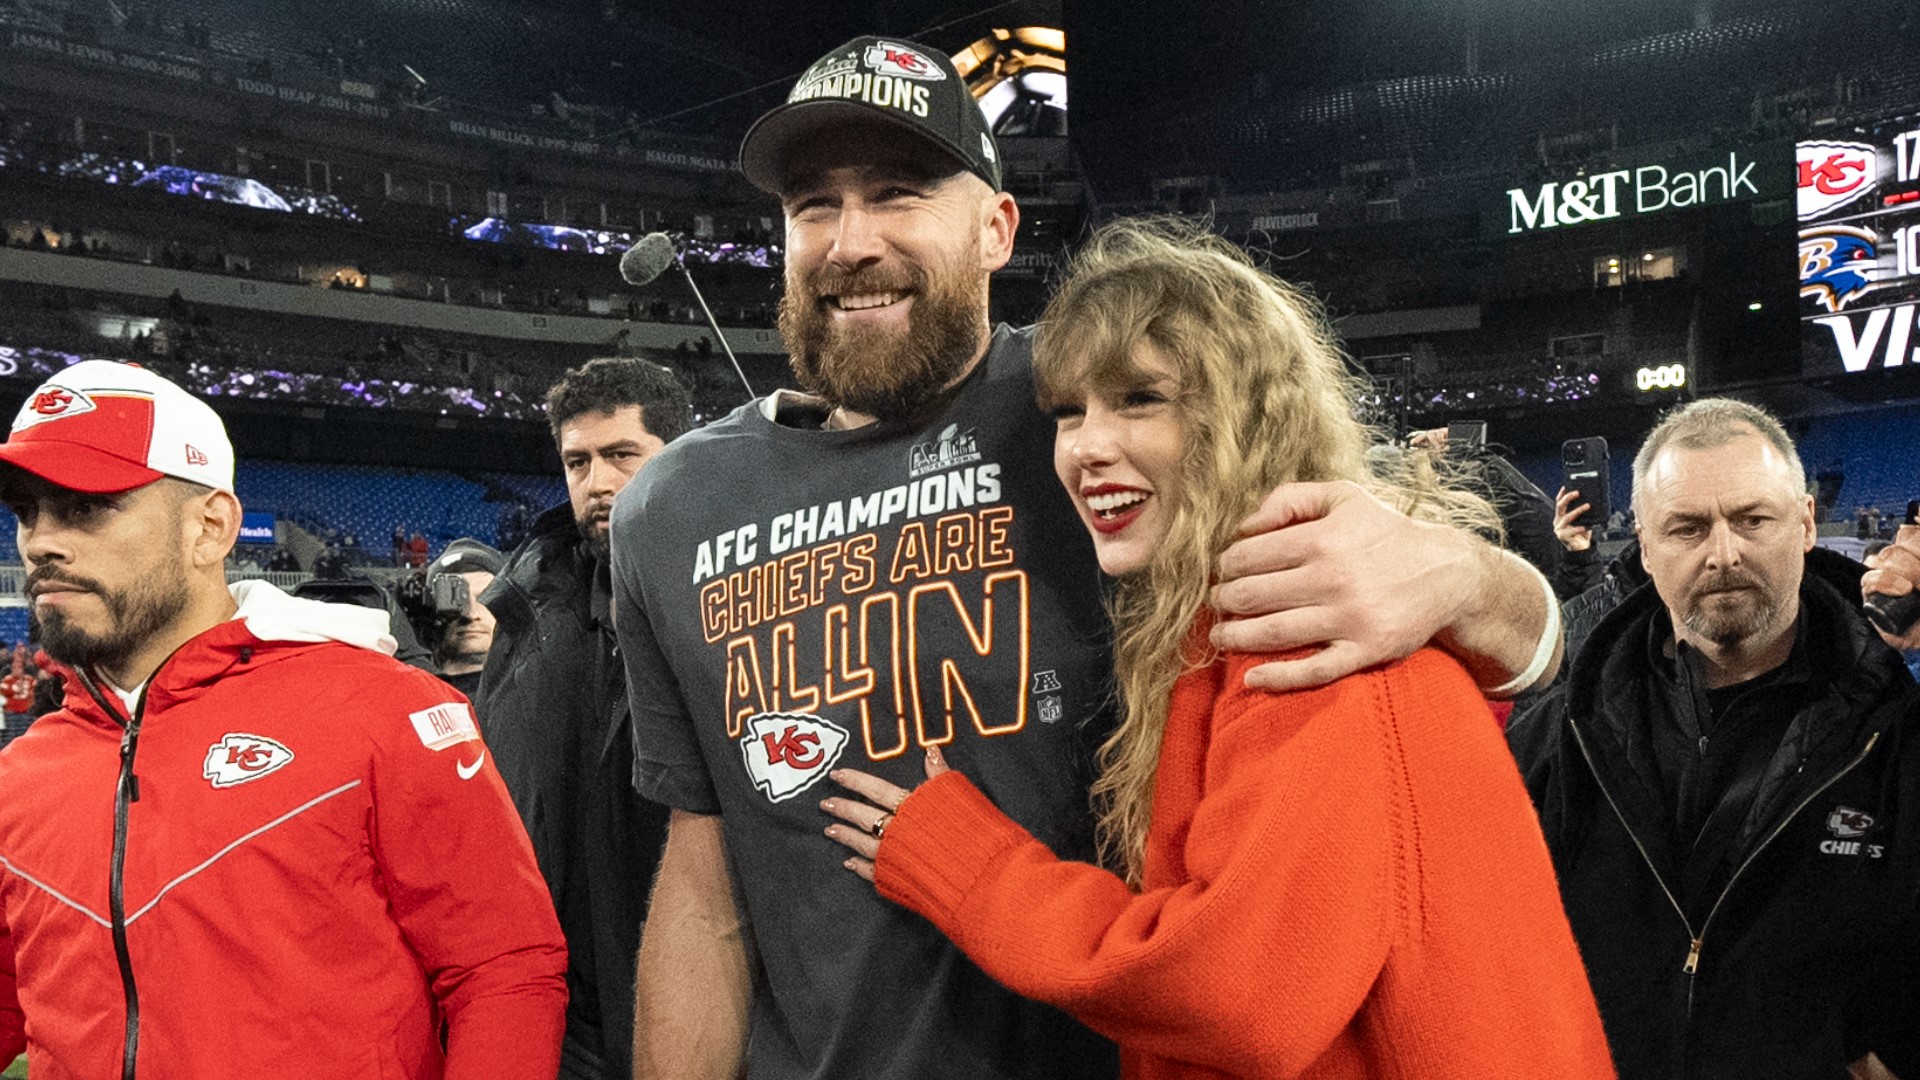 Taylor Swift's association with the NFL has boosted the league's brand value by over $122 million in just a few months, a new report says.